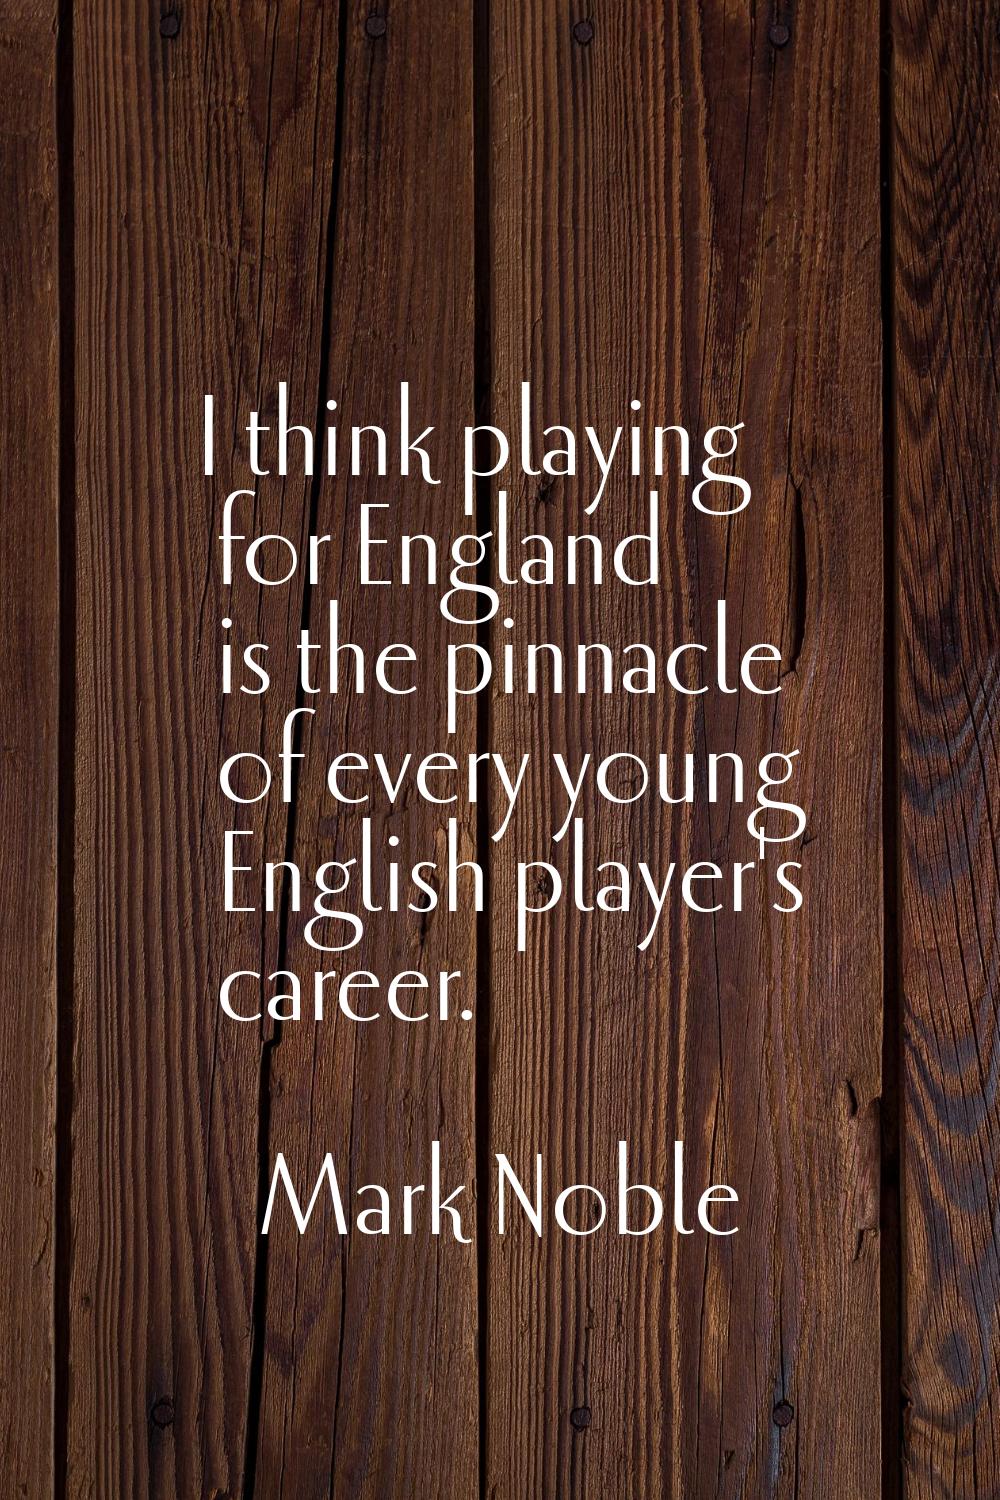 I think playing for England is the pinnacle of every young English player's career.